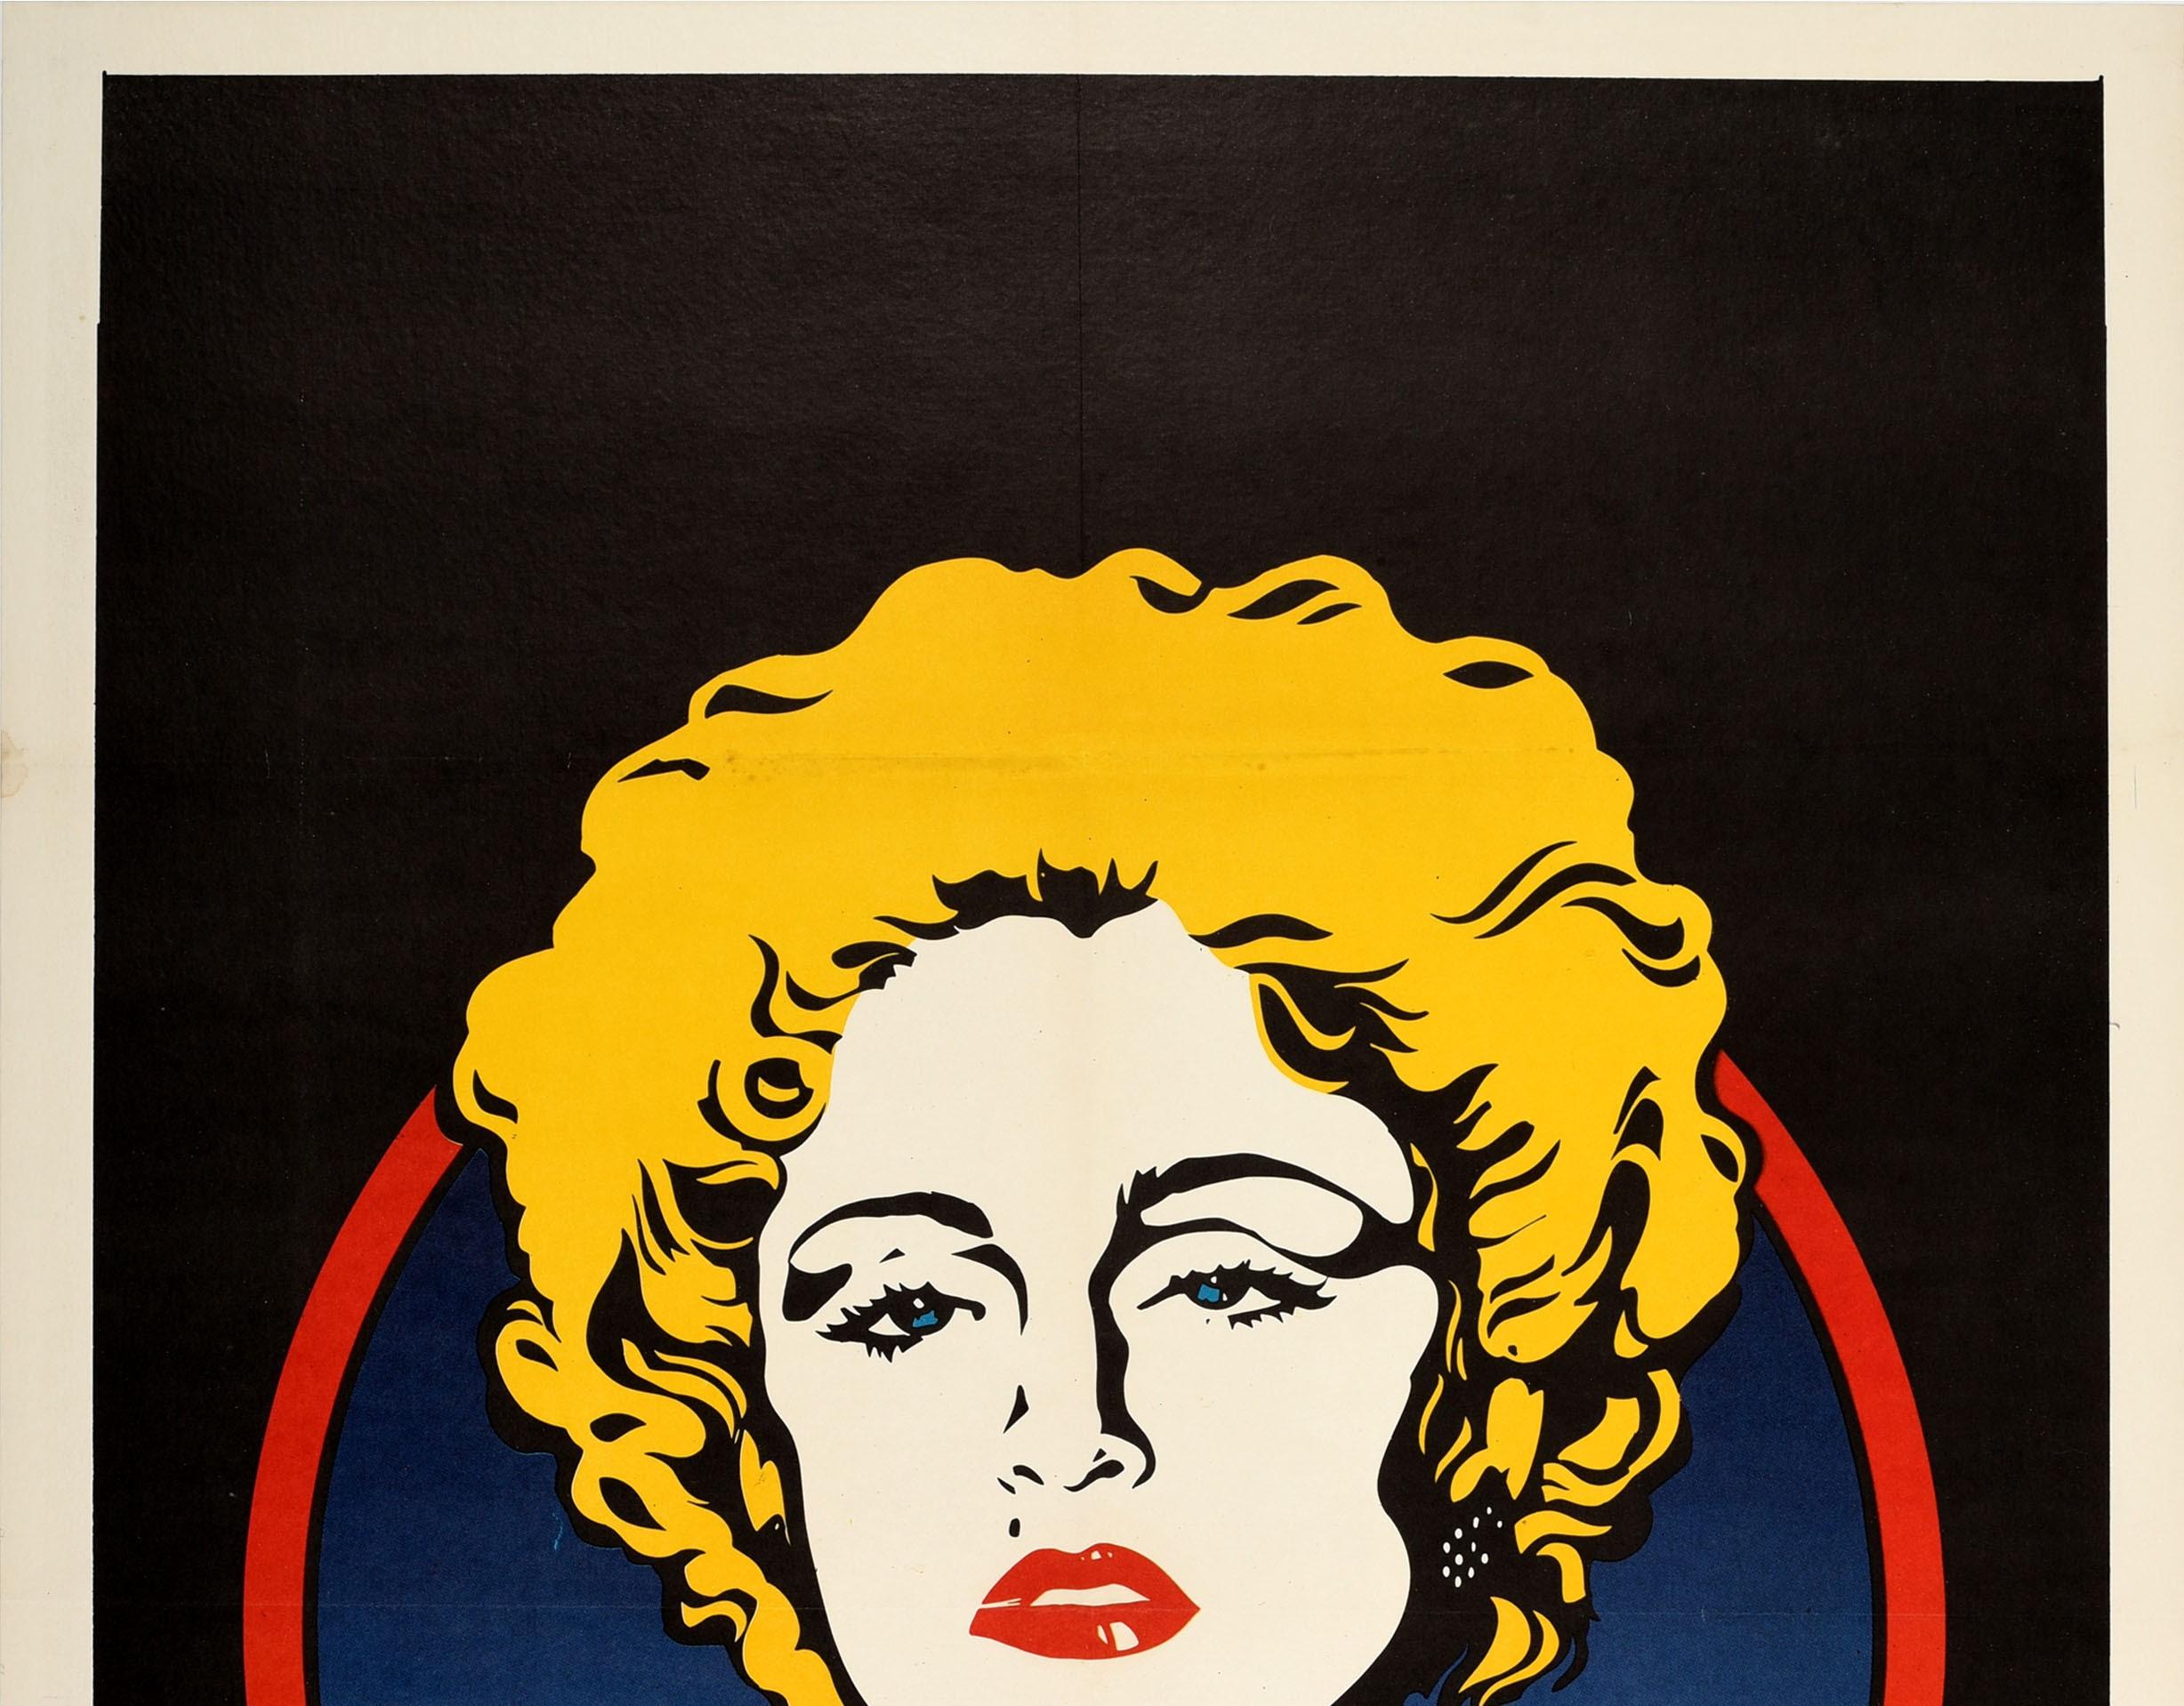 Original vintage film poster for an action crime movie based on a comic strip detective - Dick Tracy - directed by Warren Beatty and starring Warren Beatty, Madonna and Al Pacino, featuring a colourful Pop Art style image of Madonna as Breathless